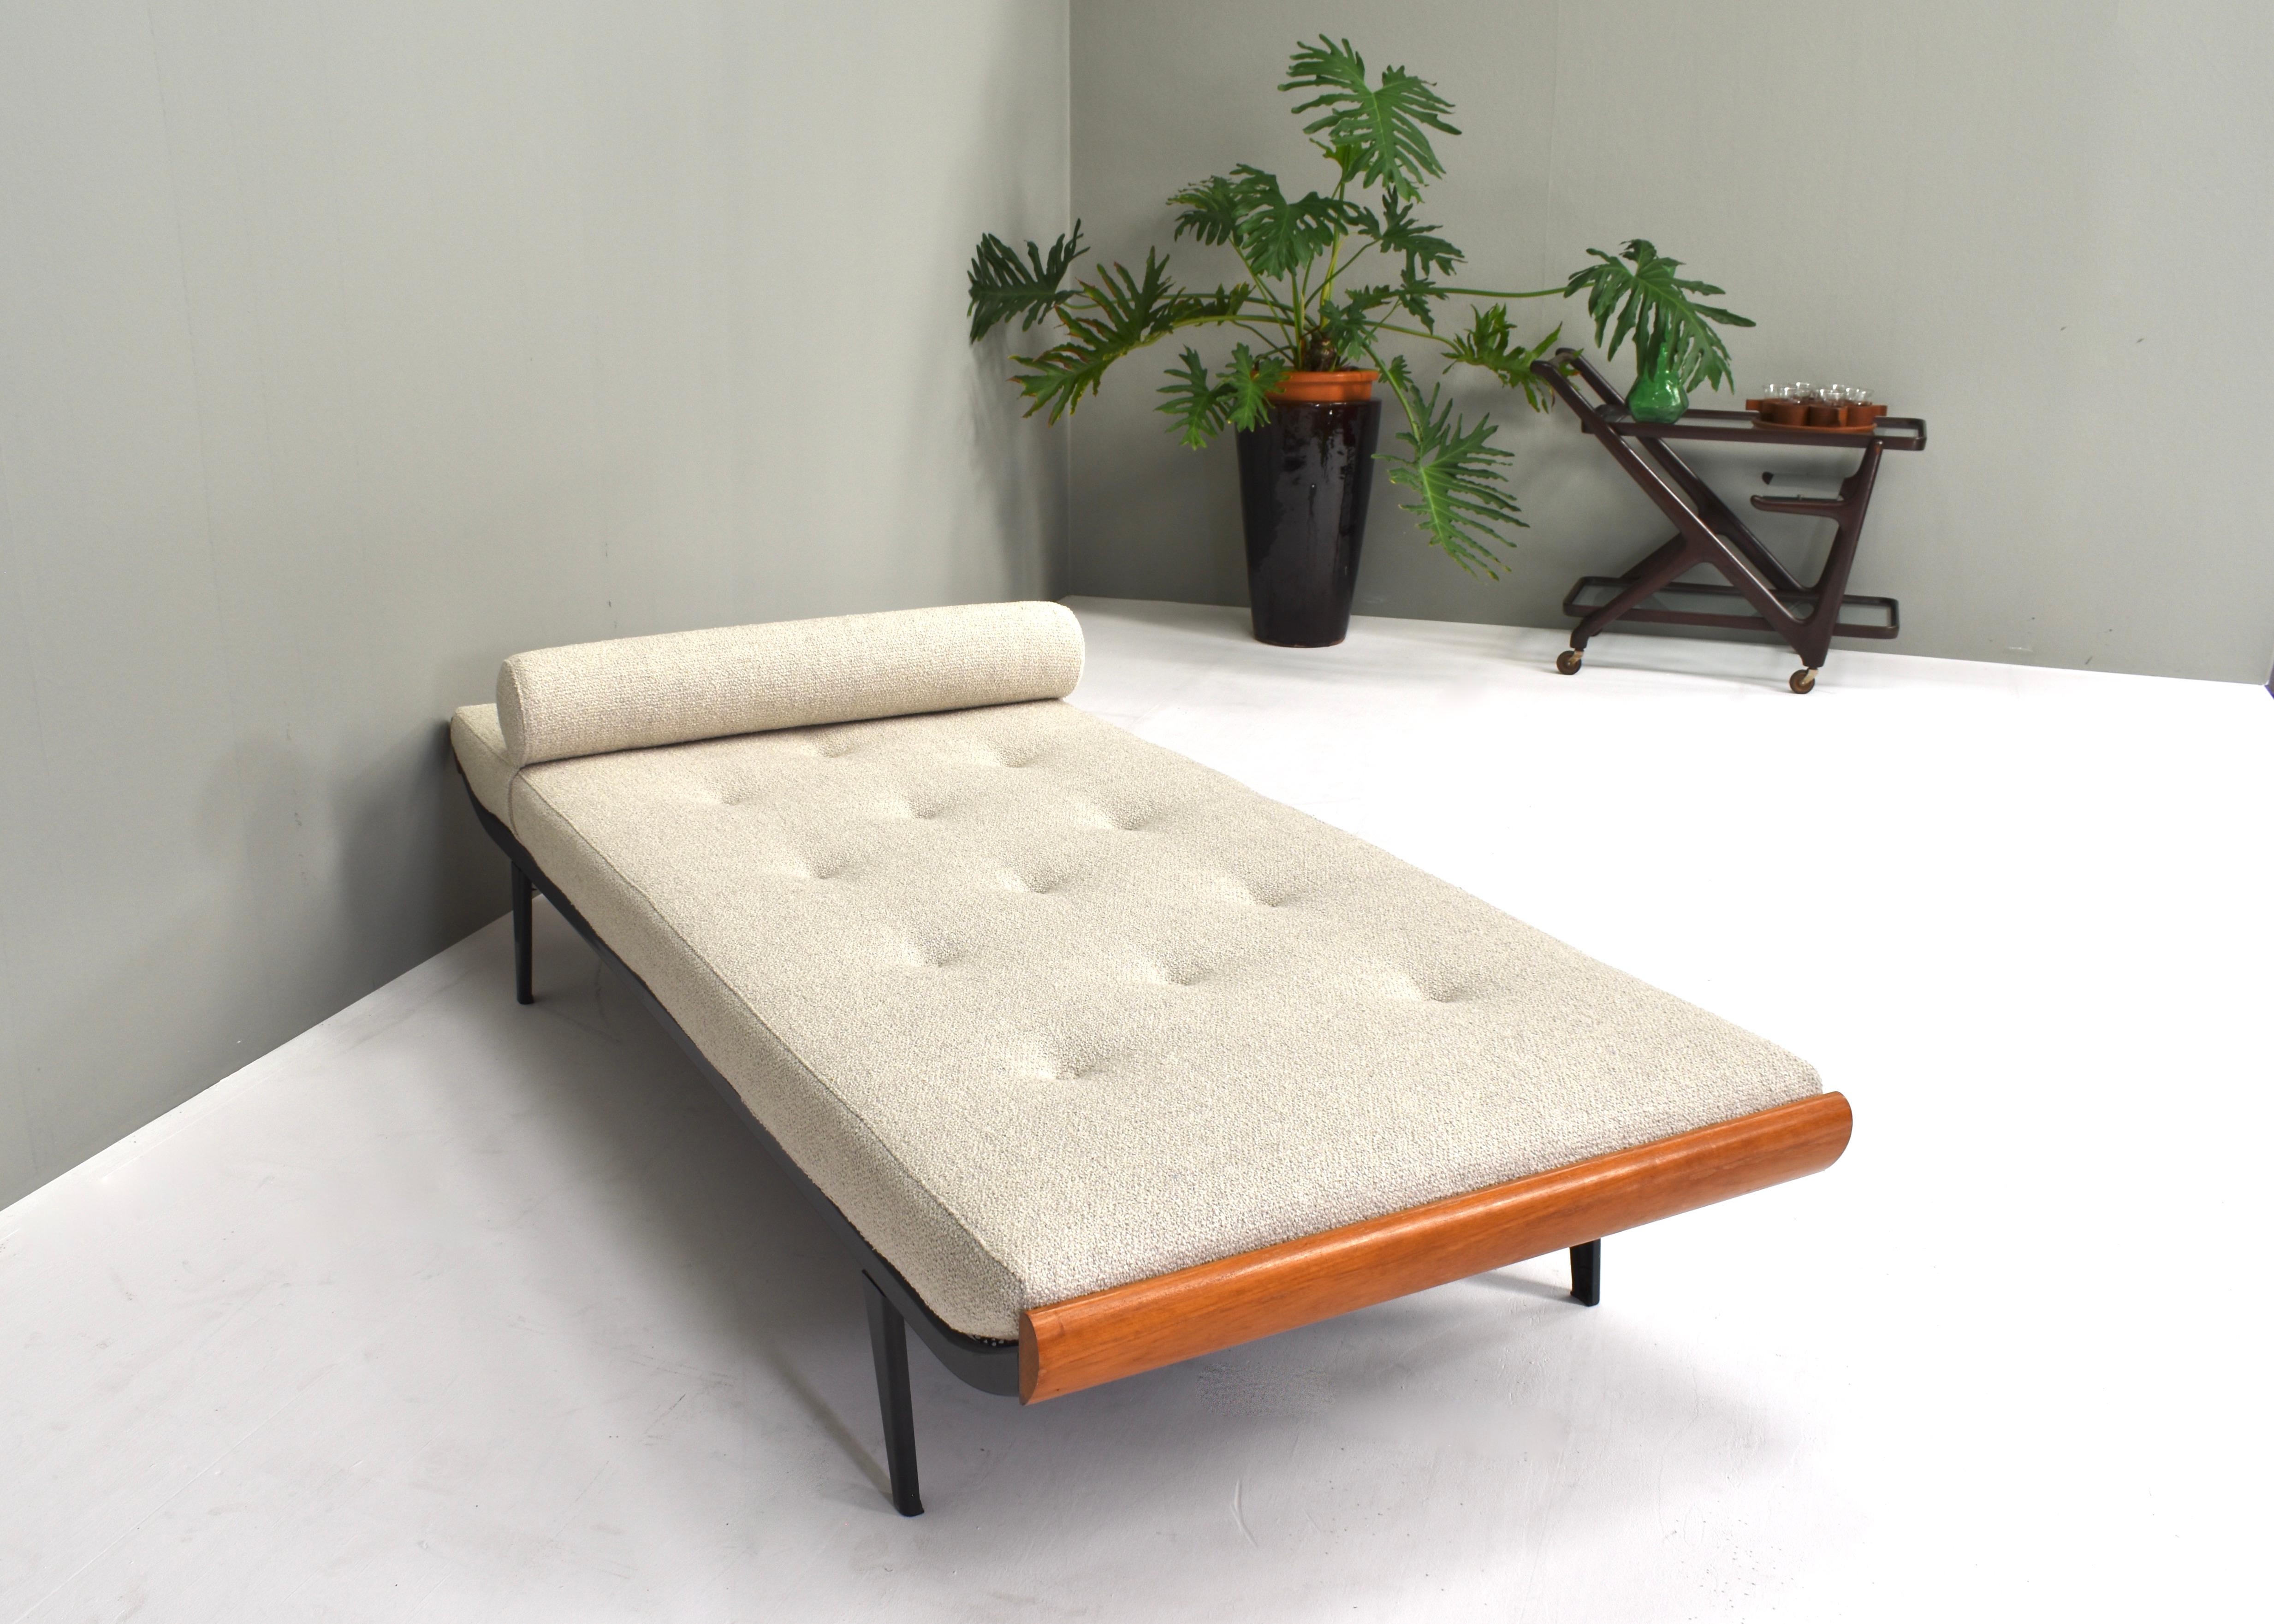 Mid-20th Century Cleopatra Daybed by Cordemeijer for Auping, Netherlands, 1954